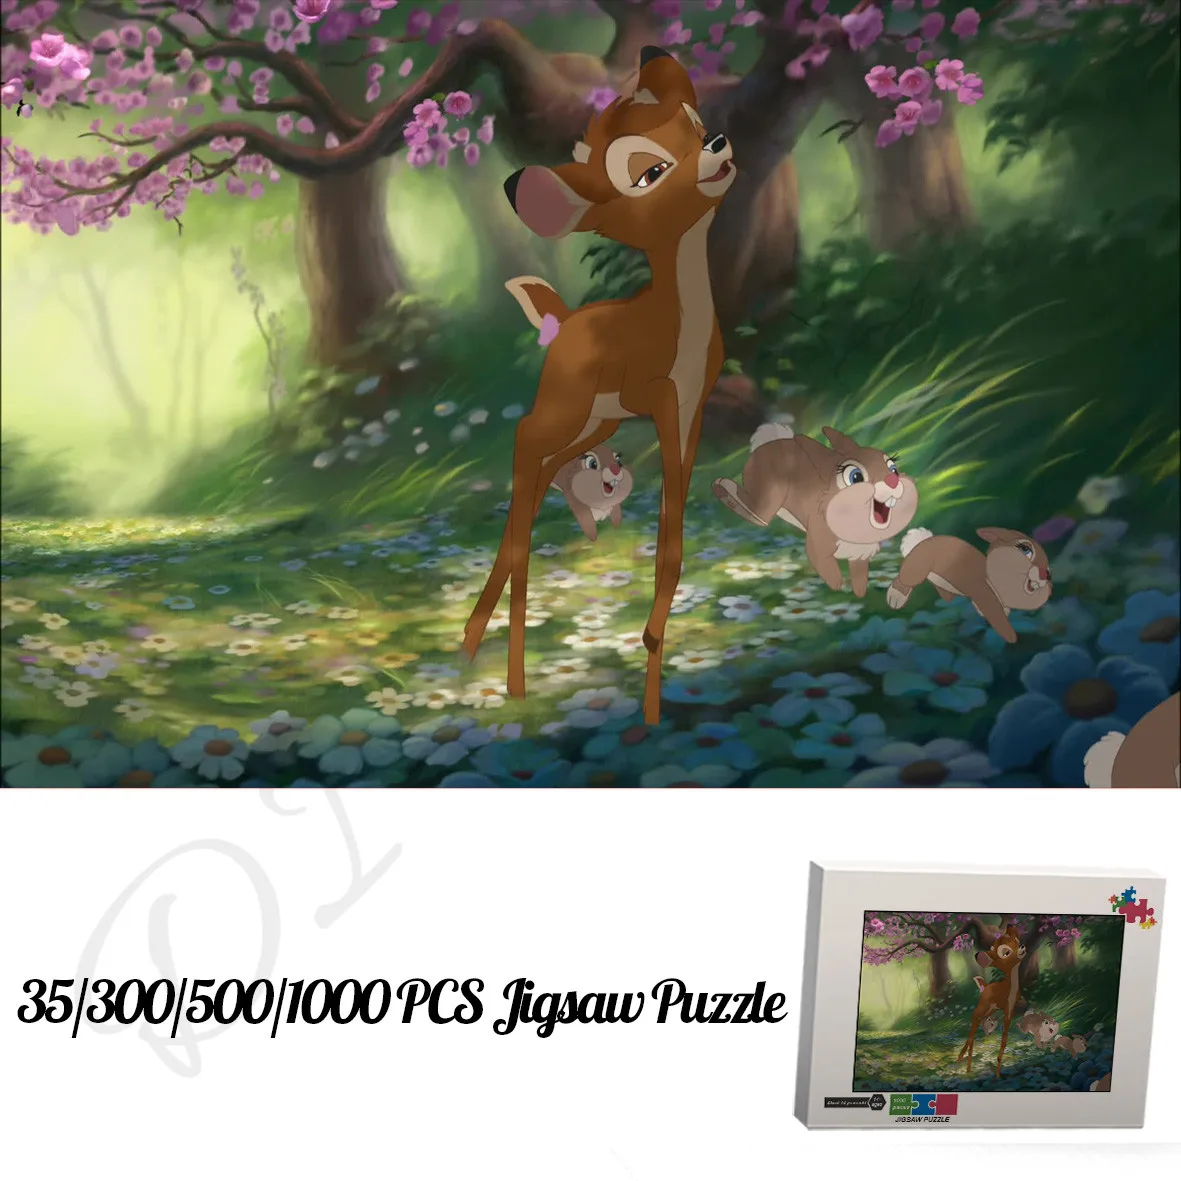 Bambi 35 300 500 1000 Pieces Jigsaw Puzzles Disney Cartoon Animation Wooden and Box Puzzles for Kids Decompressed Funny Toys ravensburger bambi составная картинка головоломка 1000 шт 19677